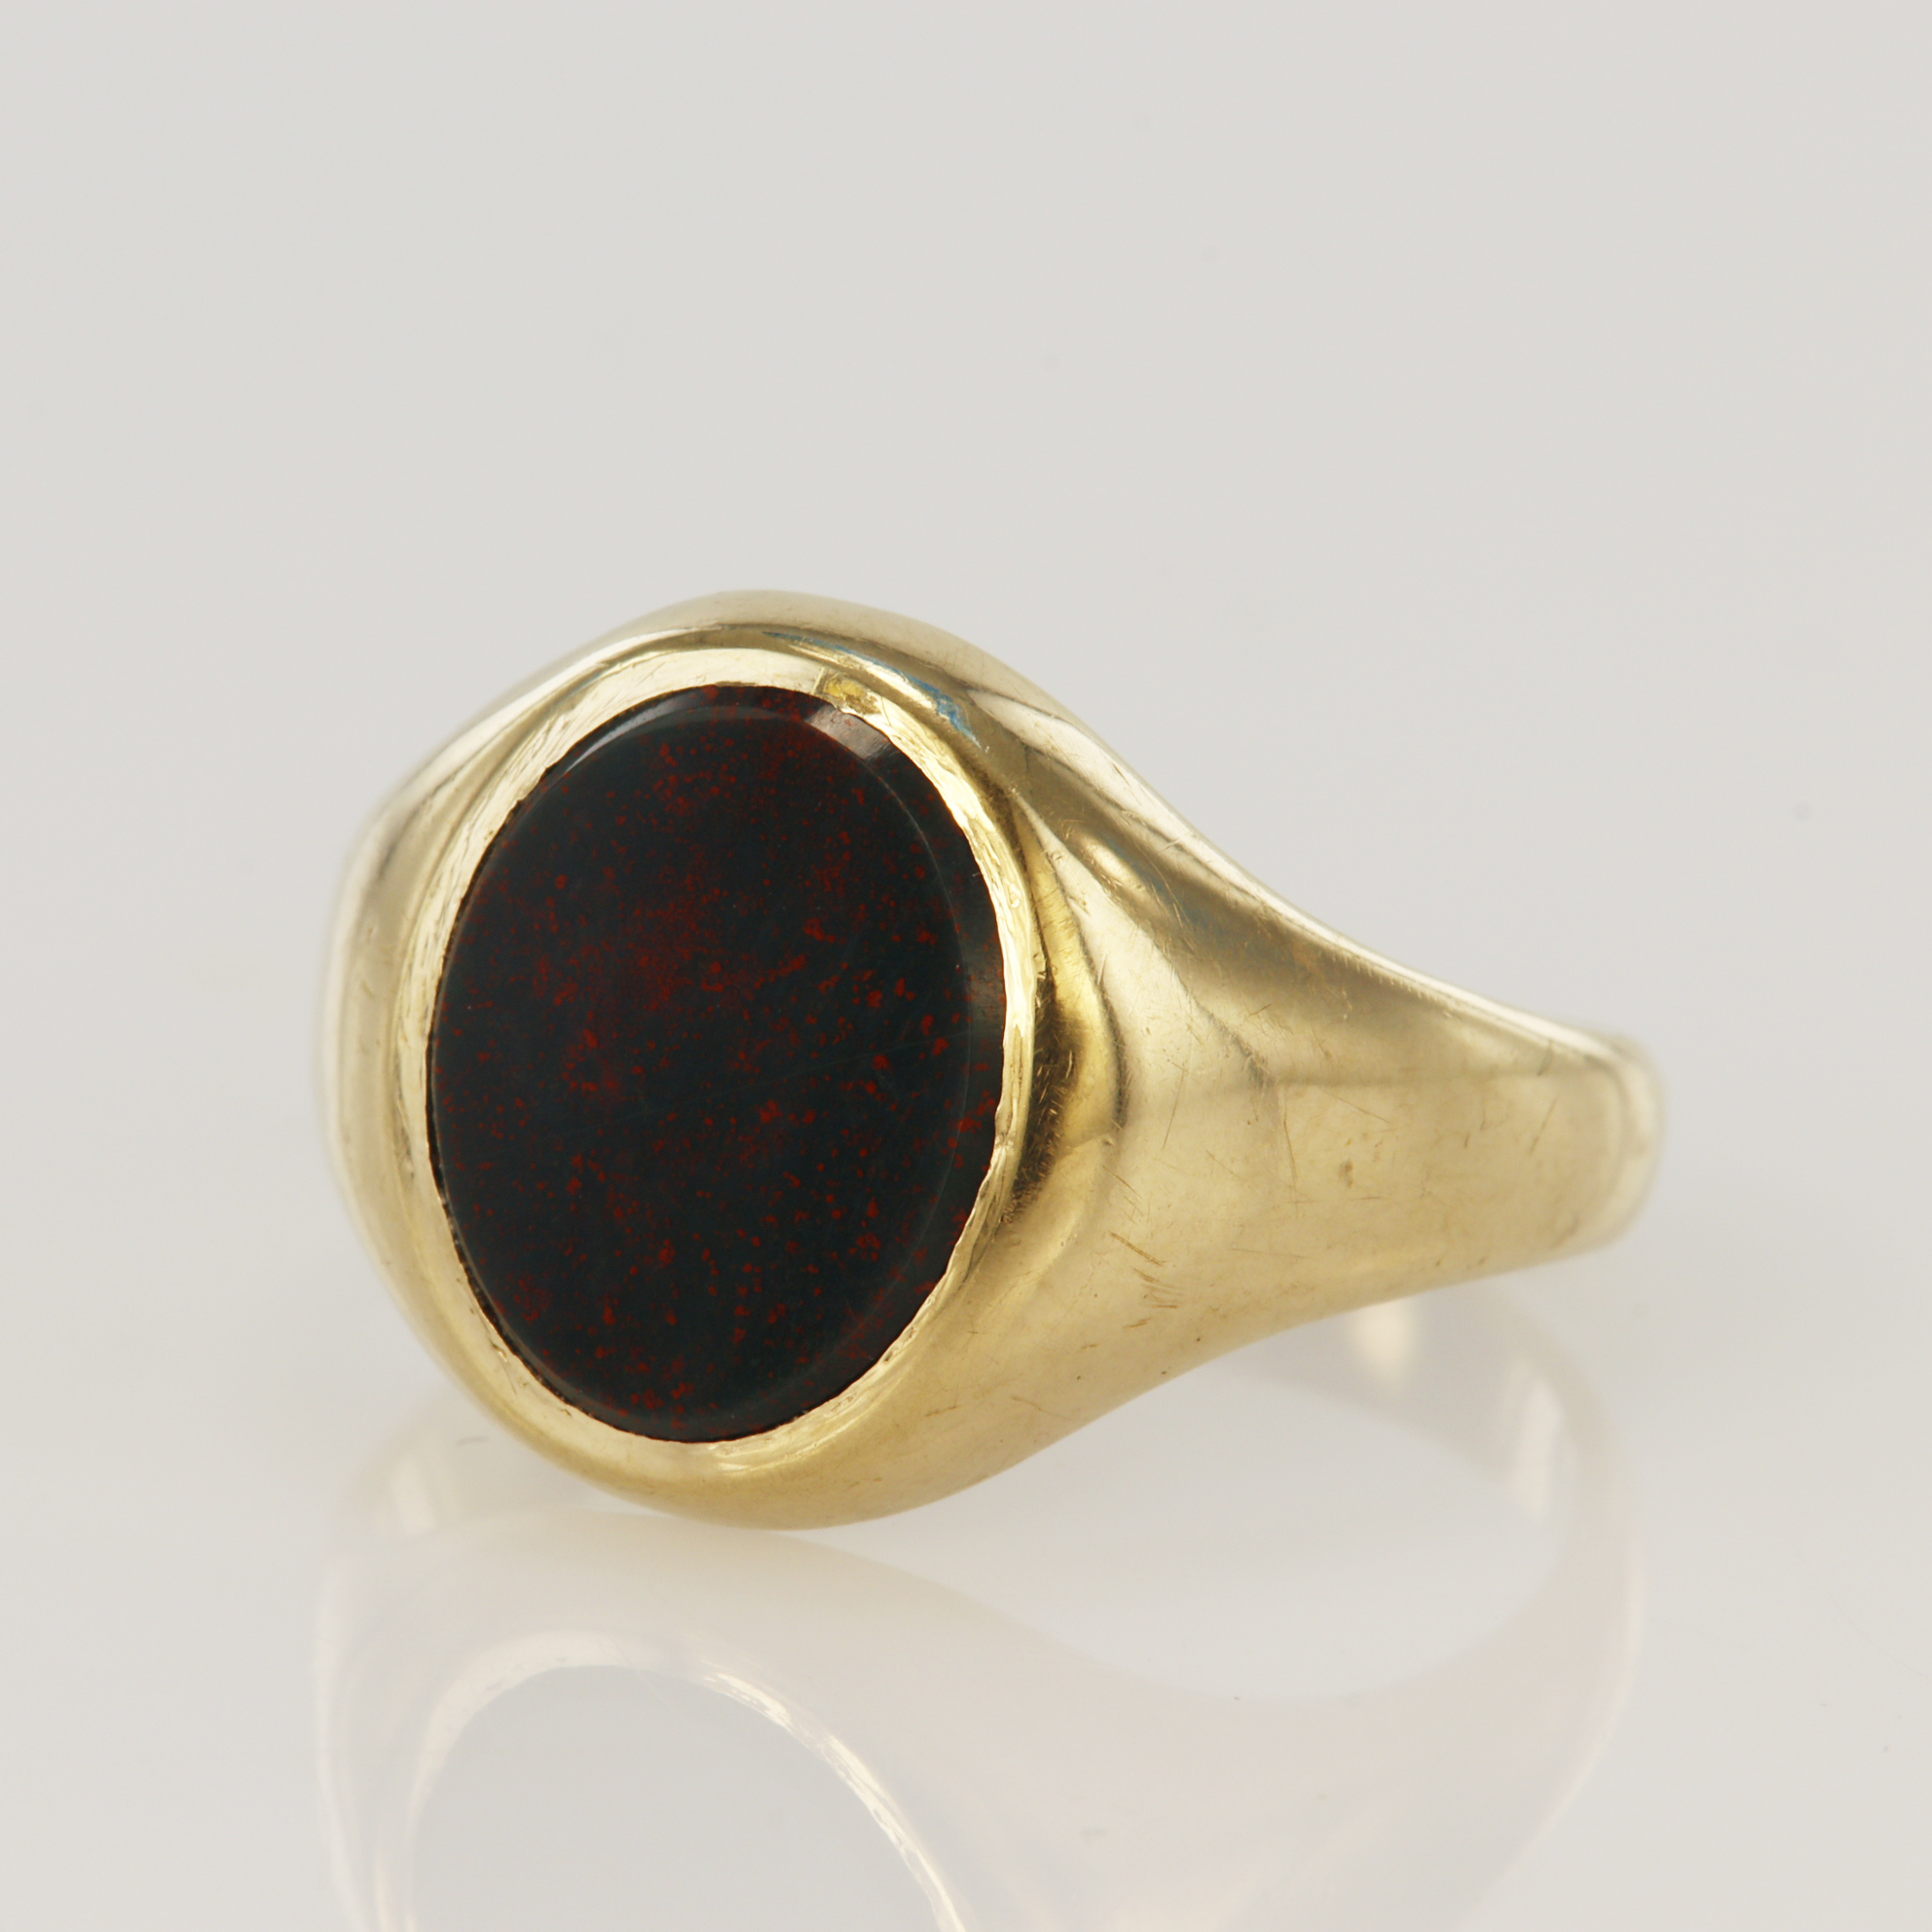 9ct yellow gold bloodstone signet ring, table measures approx. 11 x 10mm, finger size R, weight 6.